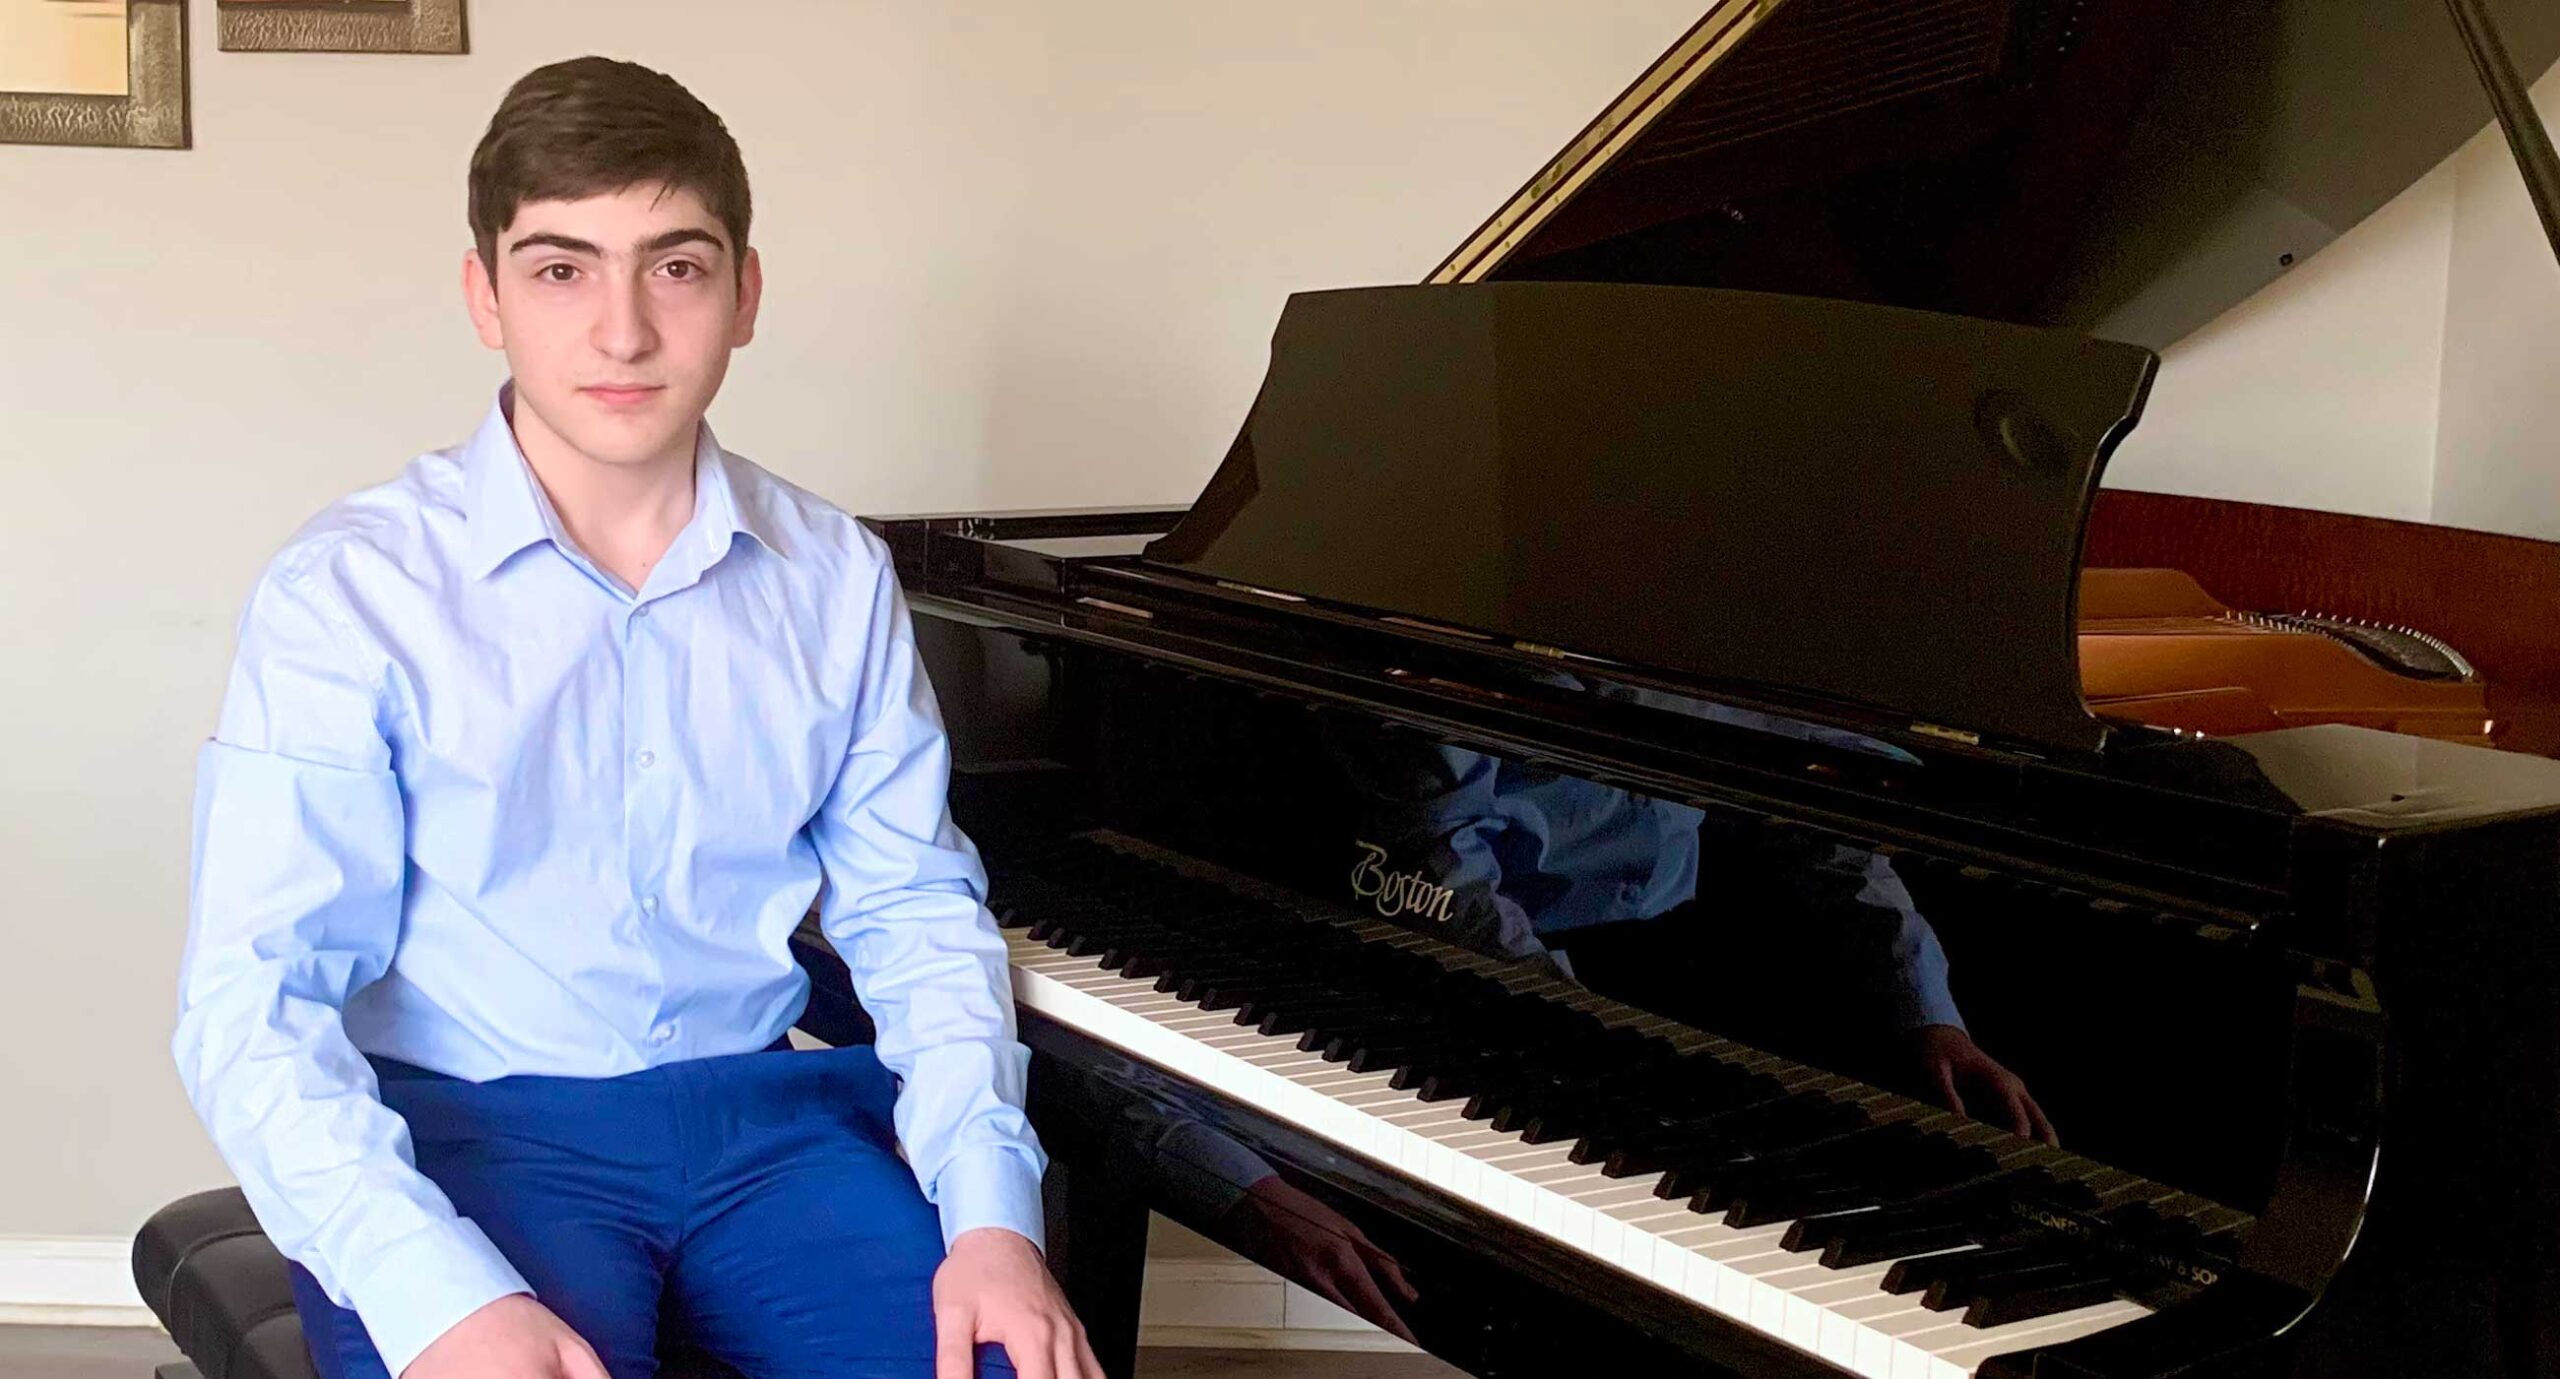 Ashot Ter-Martirosyan sitting in front of a piano